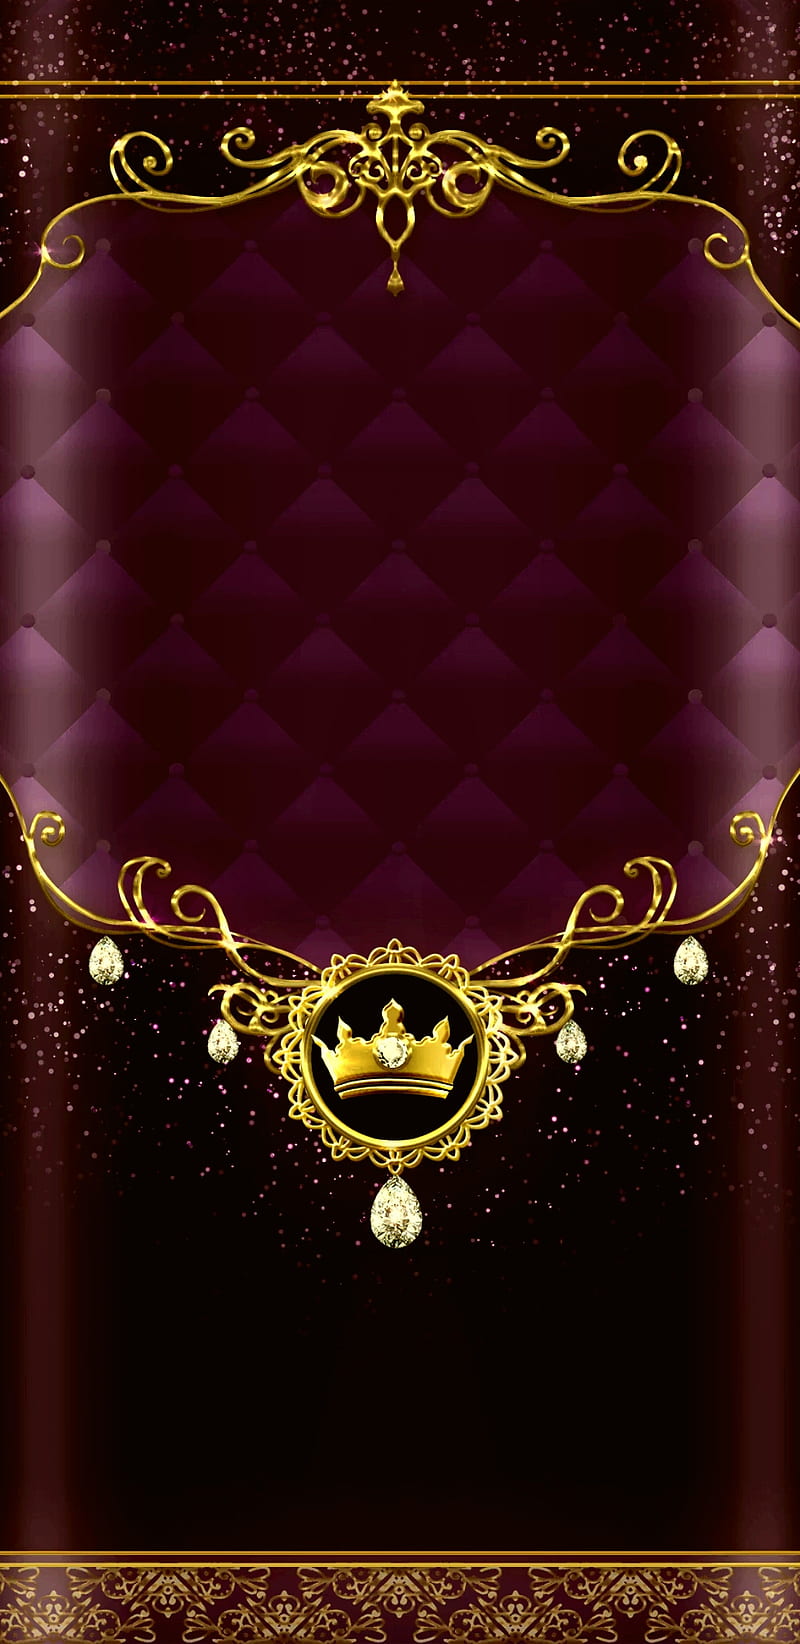 LuxMaroonCrown, bonito, crown, girly, gold, golden, luxury, maroon, pretty, HD phone wallpaper